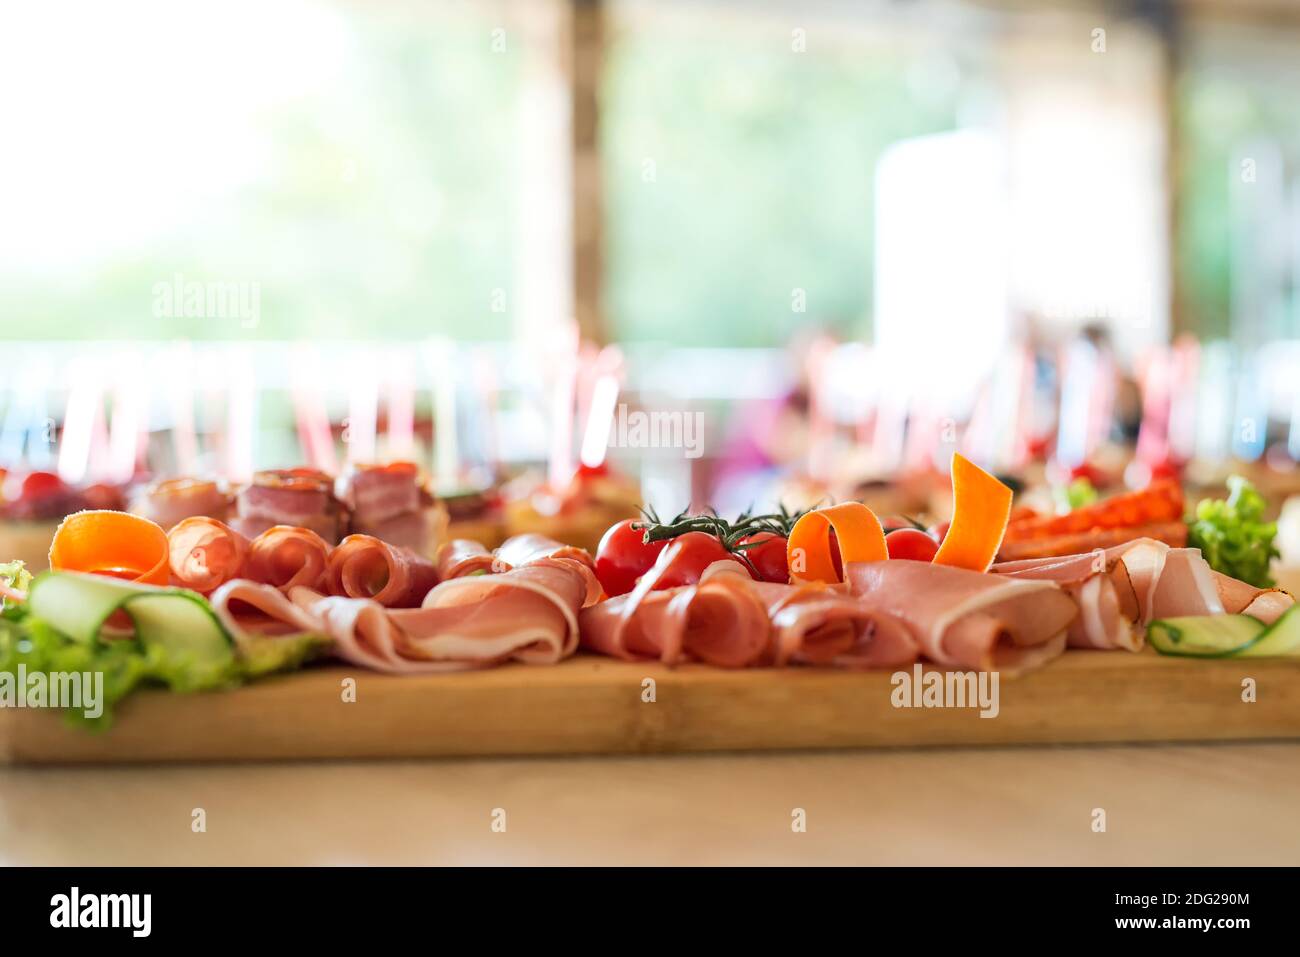 The buffet at the reception. Assortment of canapes on wooden board. Banquet service. Catering, snacks with different types of cheese and meat. Party C Stock Photo